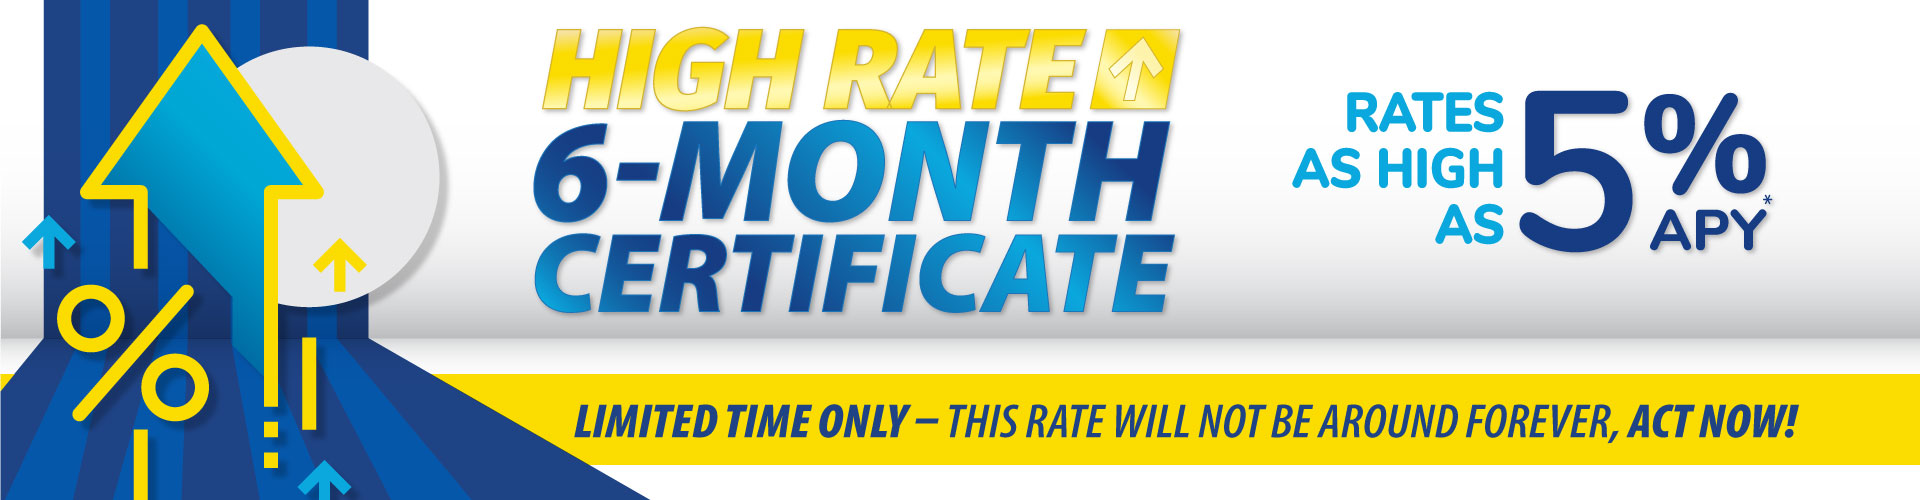 LIMITED TIME: High Rate 6-Month Certificate